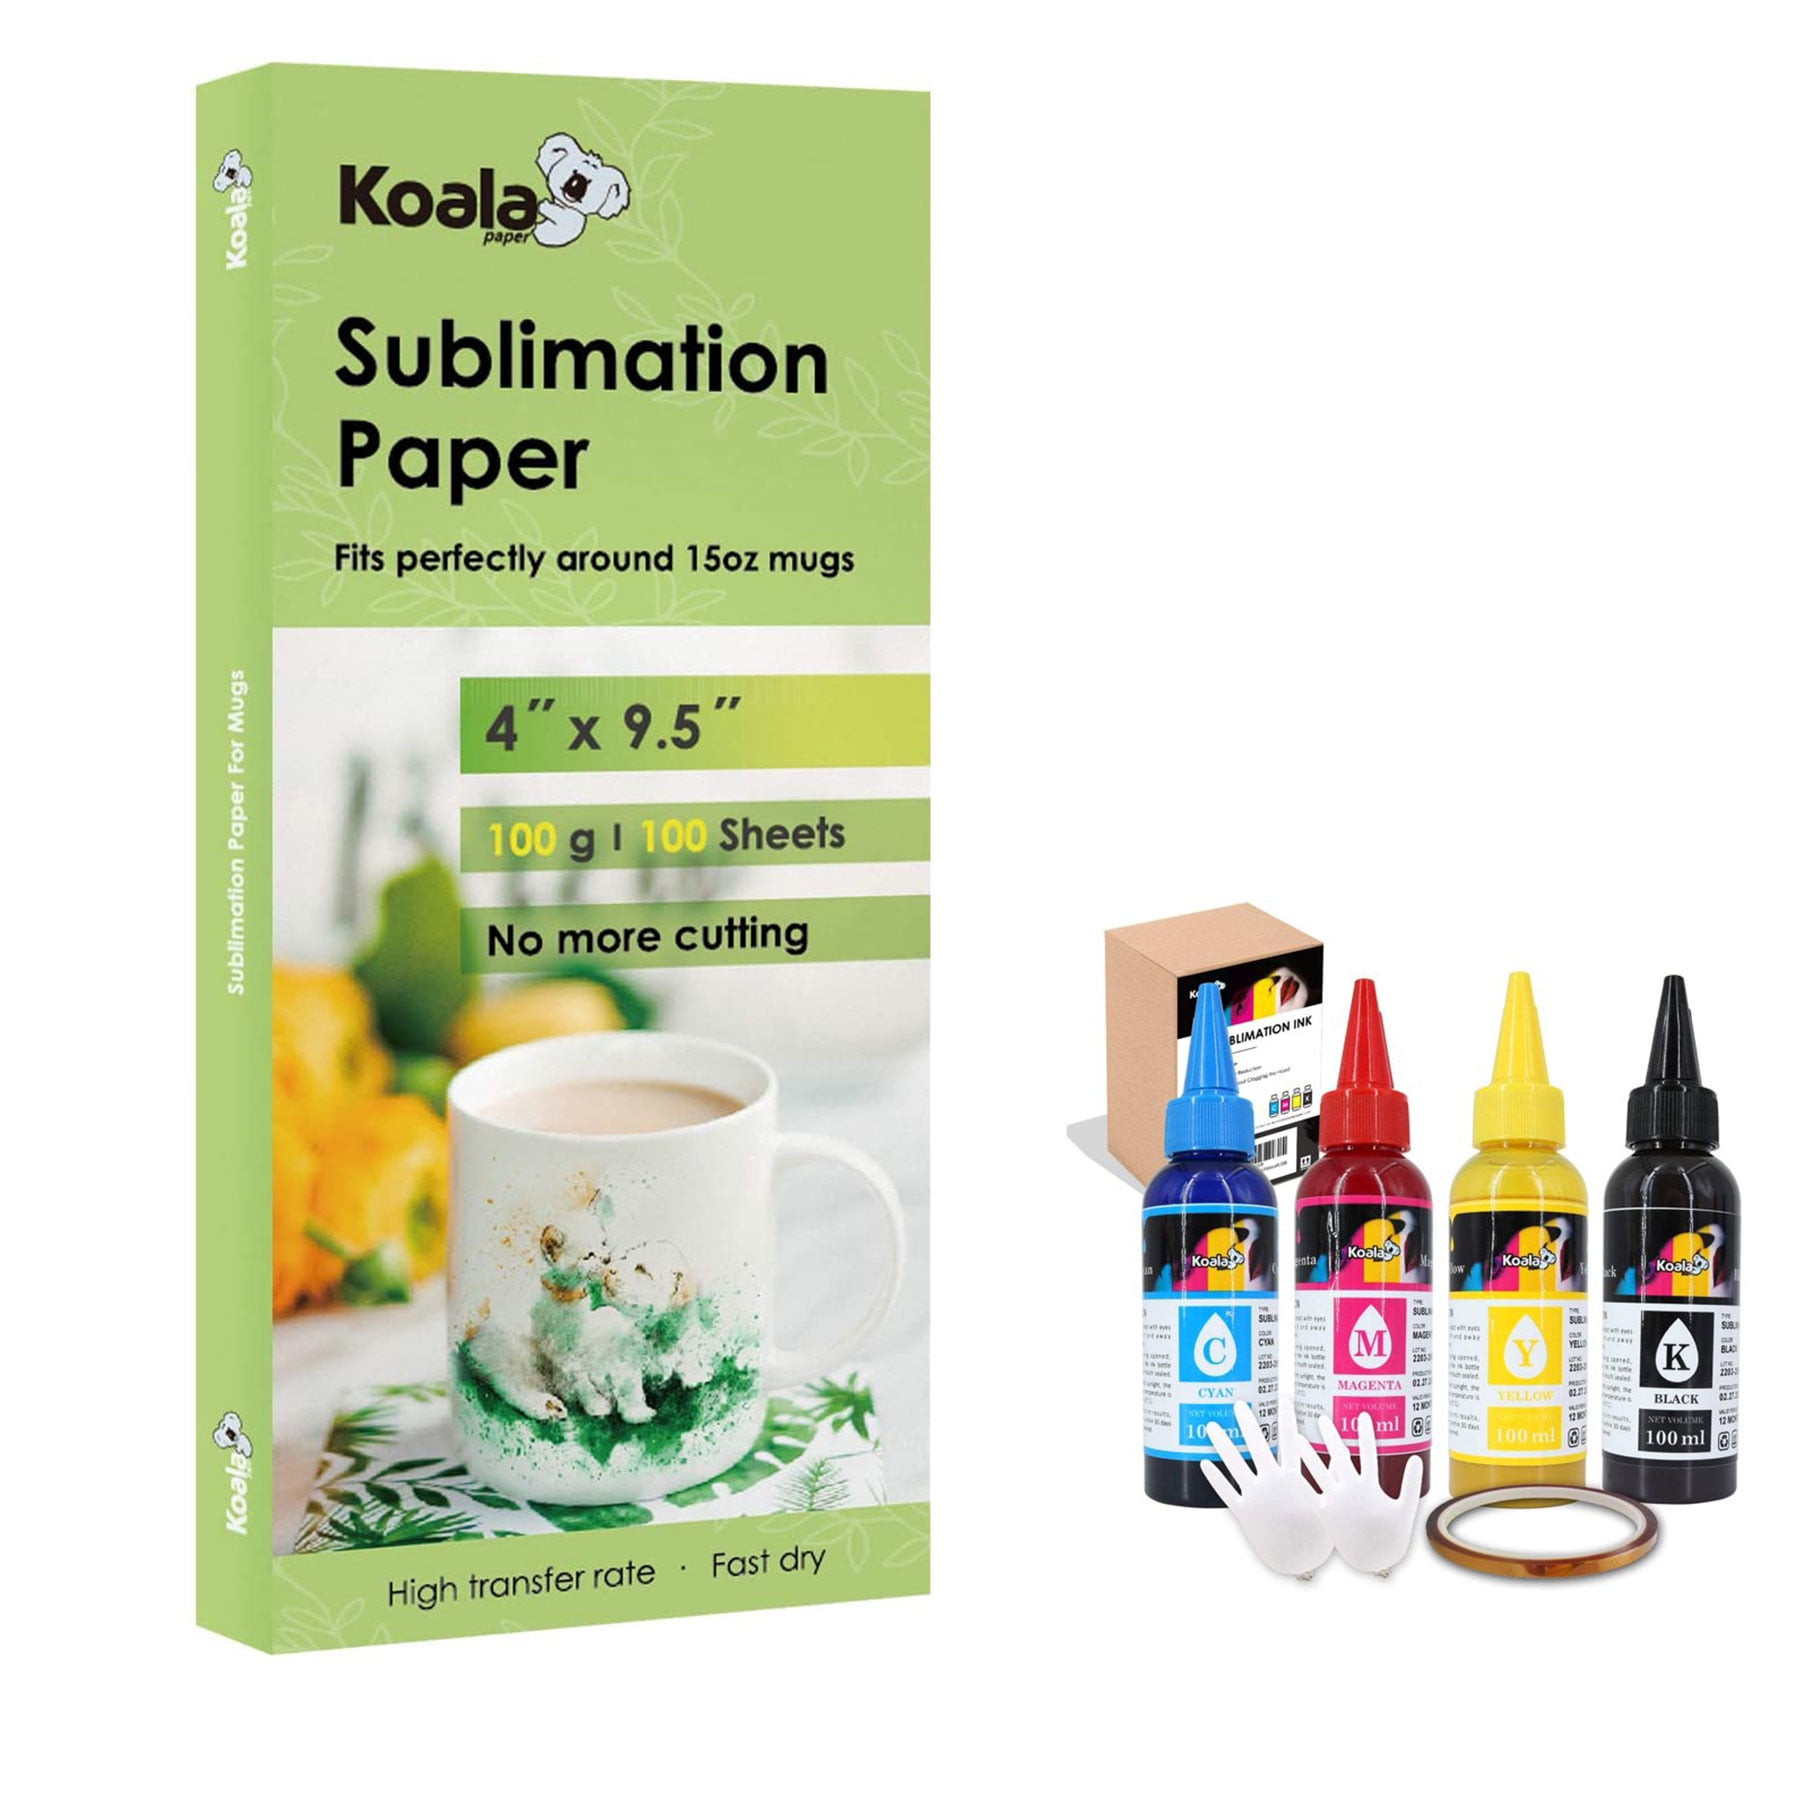 95% Transfer Rate Dye Sublimation Paper For Heat Press From Koala® Supplier